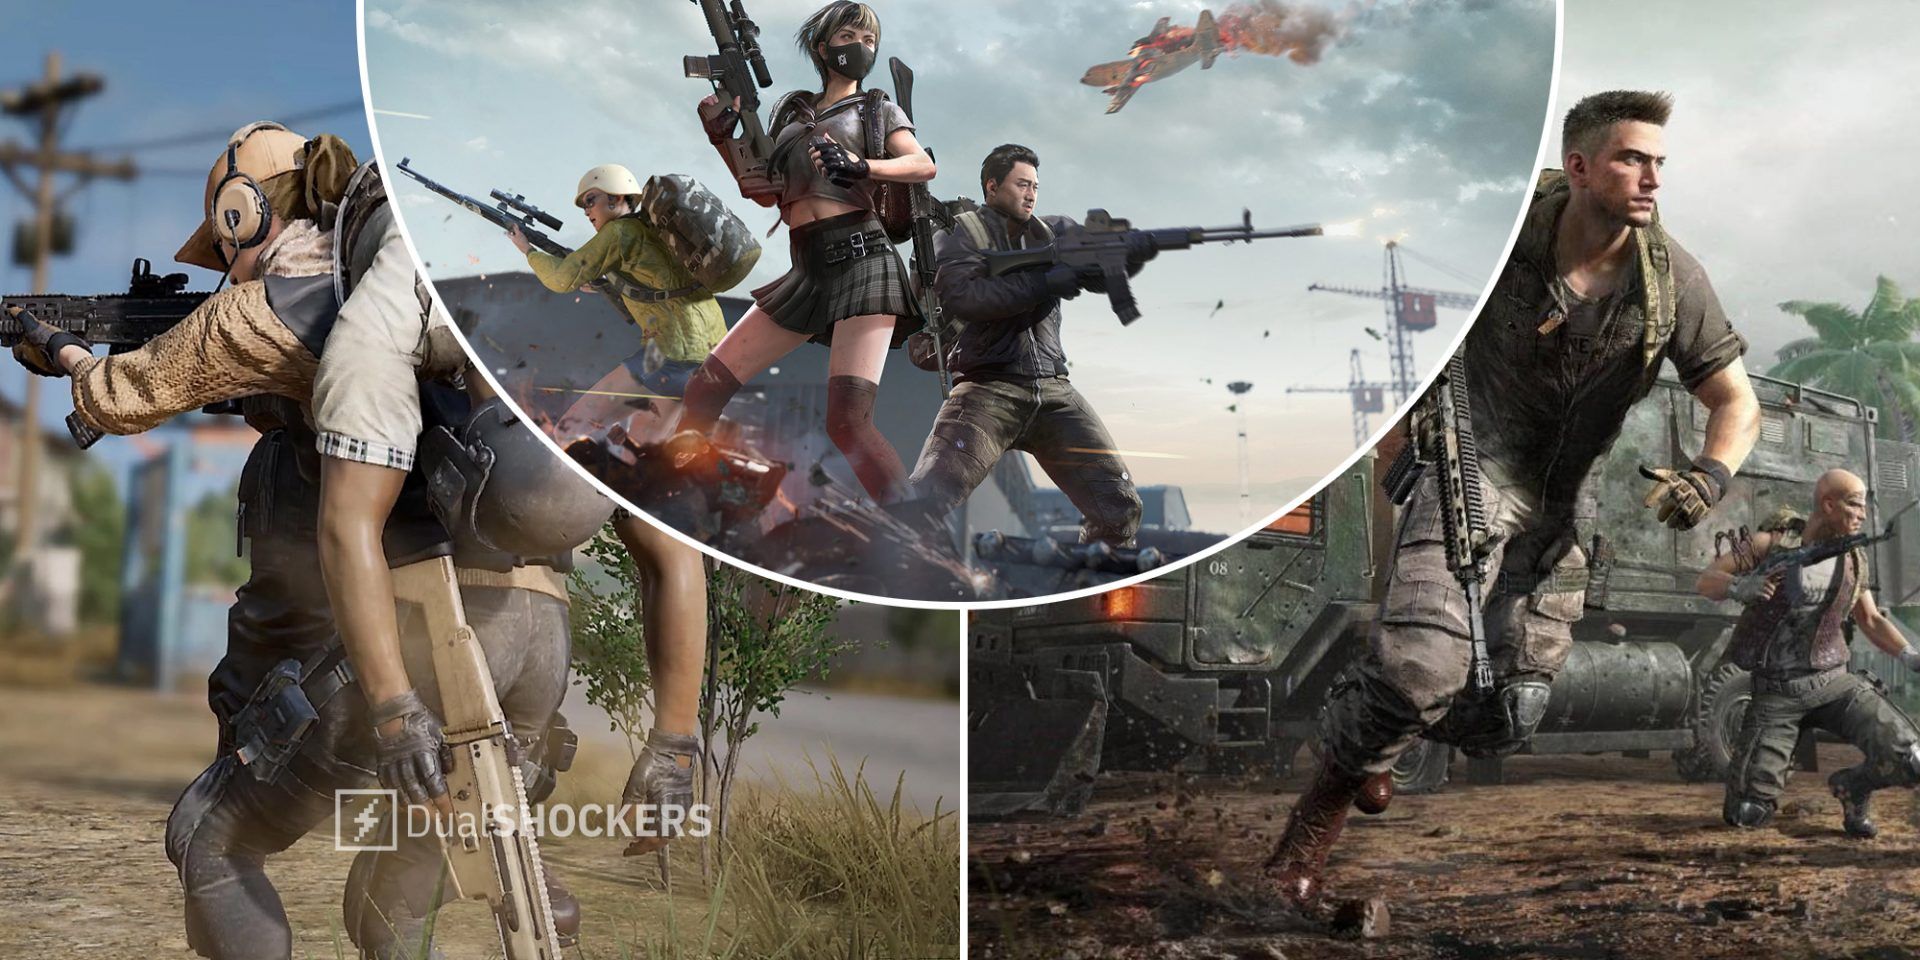 PUBG Battlegrounds player carrying another player while aiming their rifle on left, PUBG players posing with weapons in middle, players running into battle on right